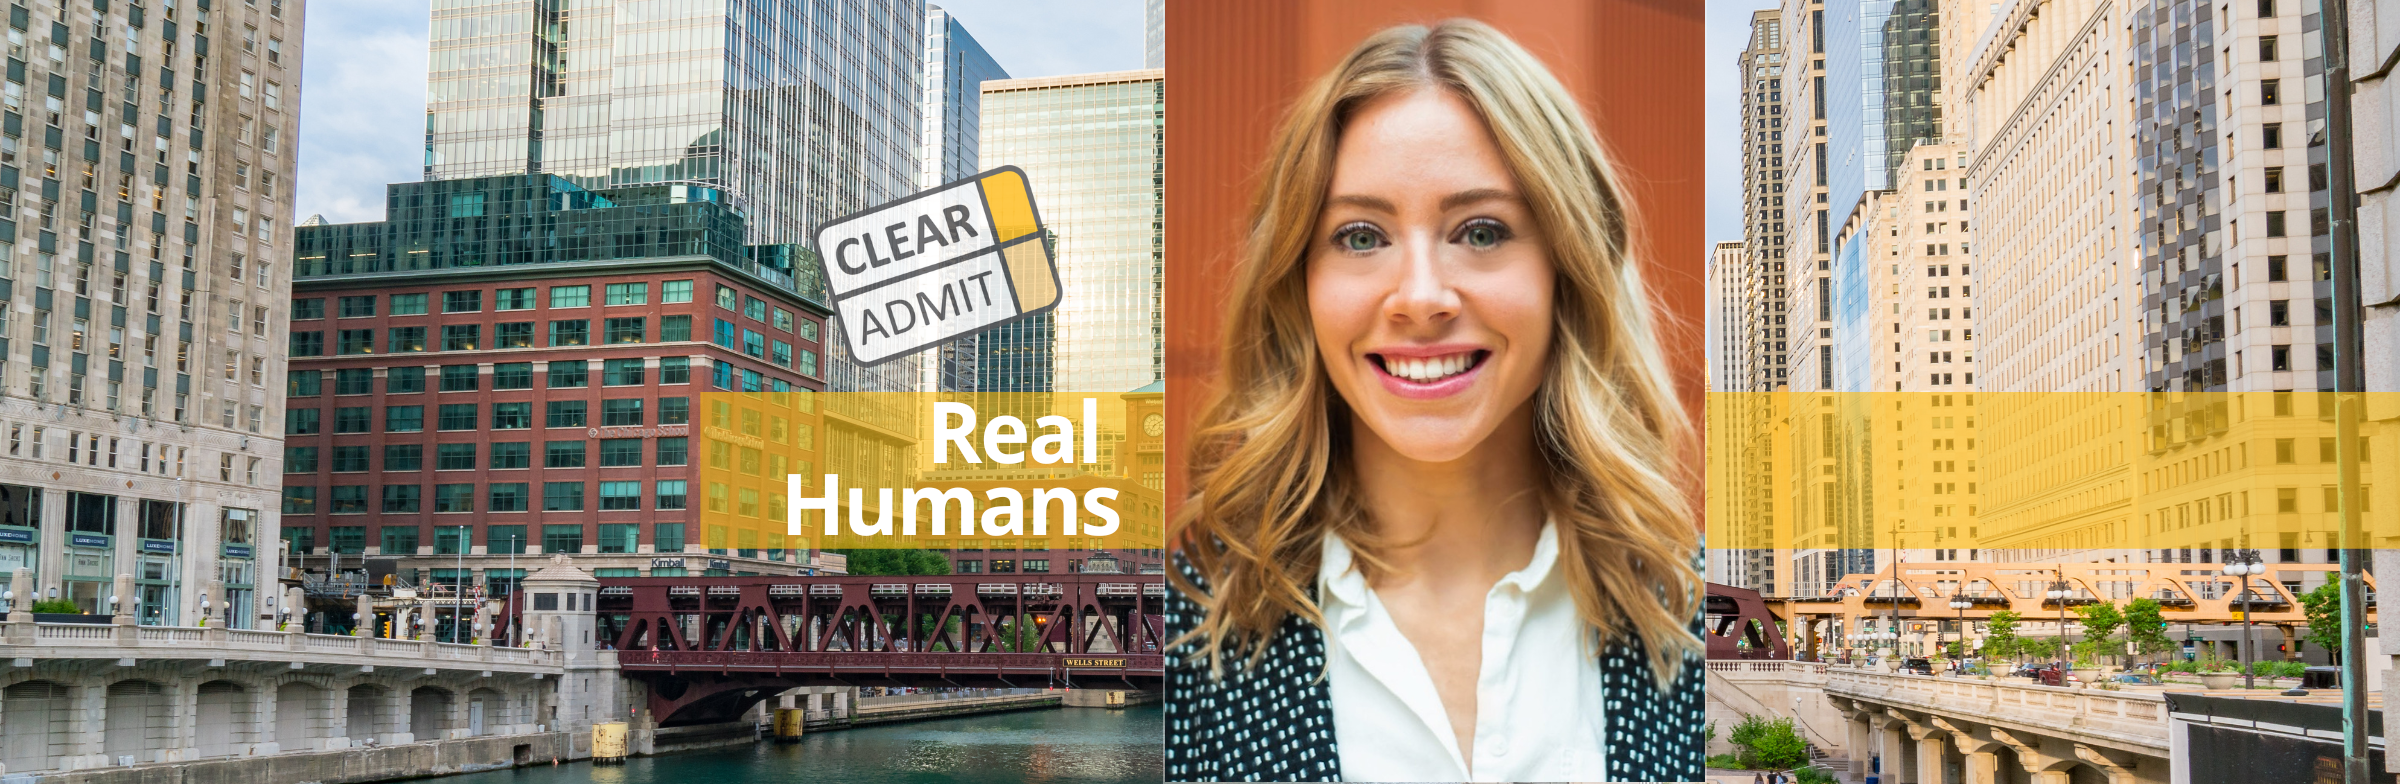 Image for Real Humans of Bain & Co.: Alyssa Singer, Michigan Ross MBA ’22, Consultant